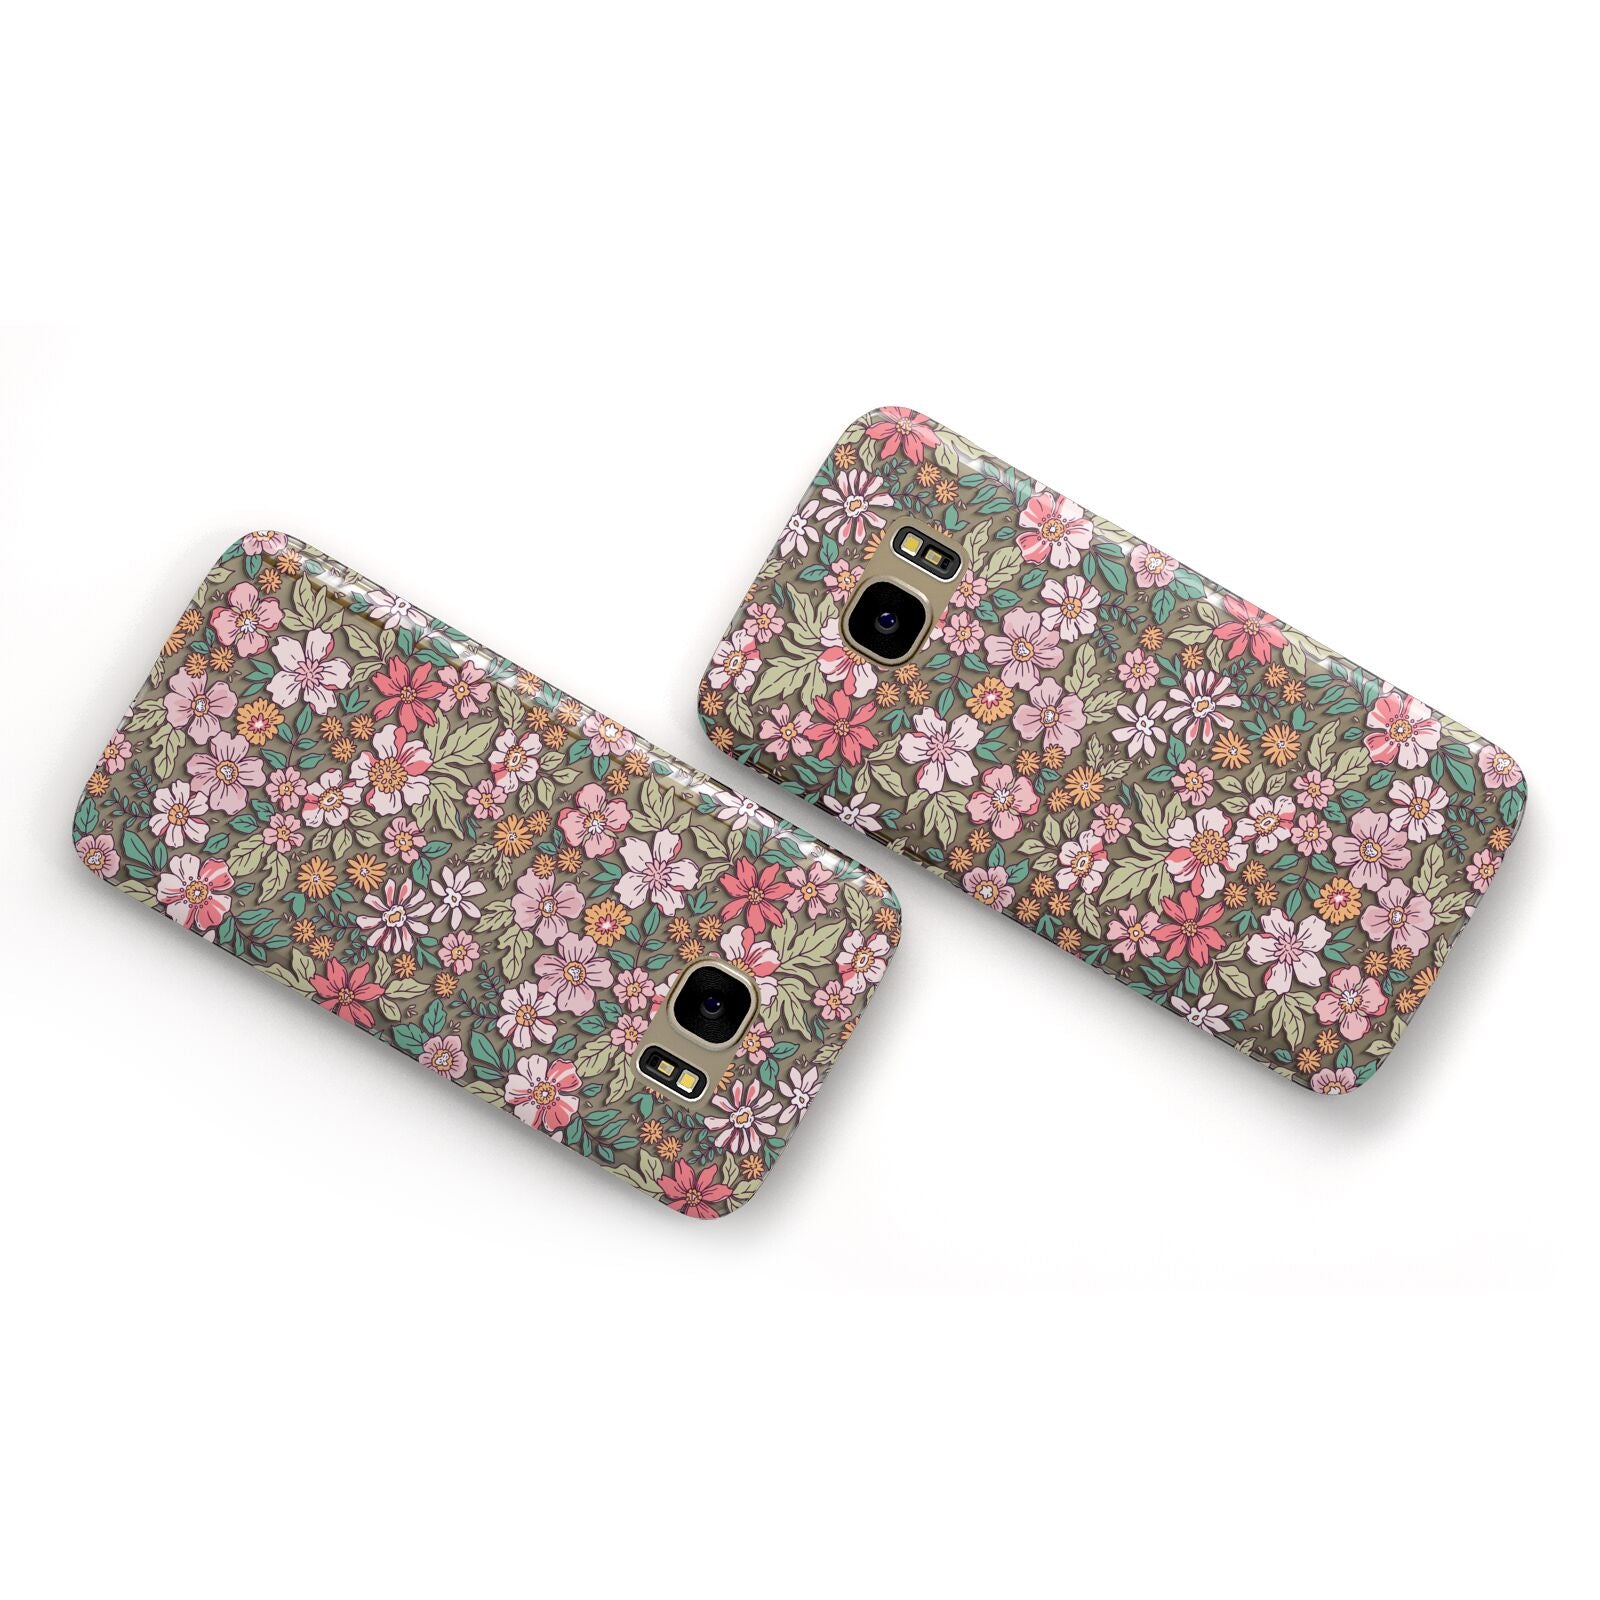 Small Floral Pattern Samsung Galaxy Case Flat Overview